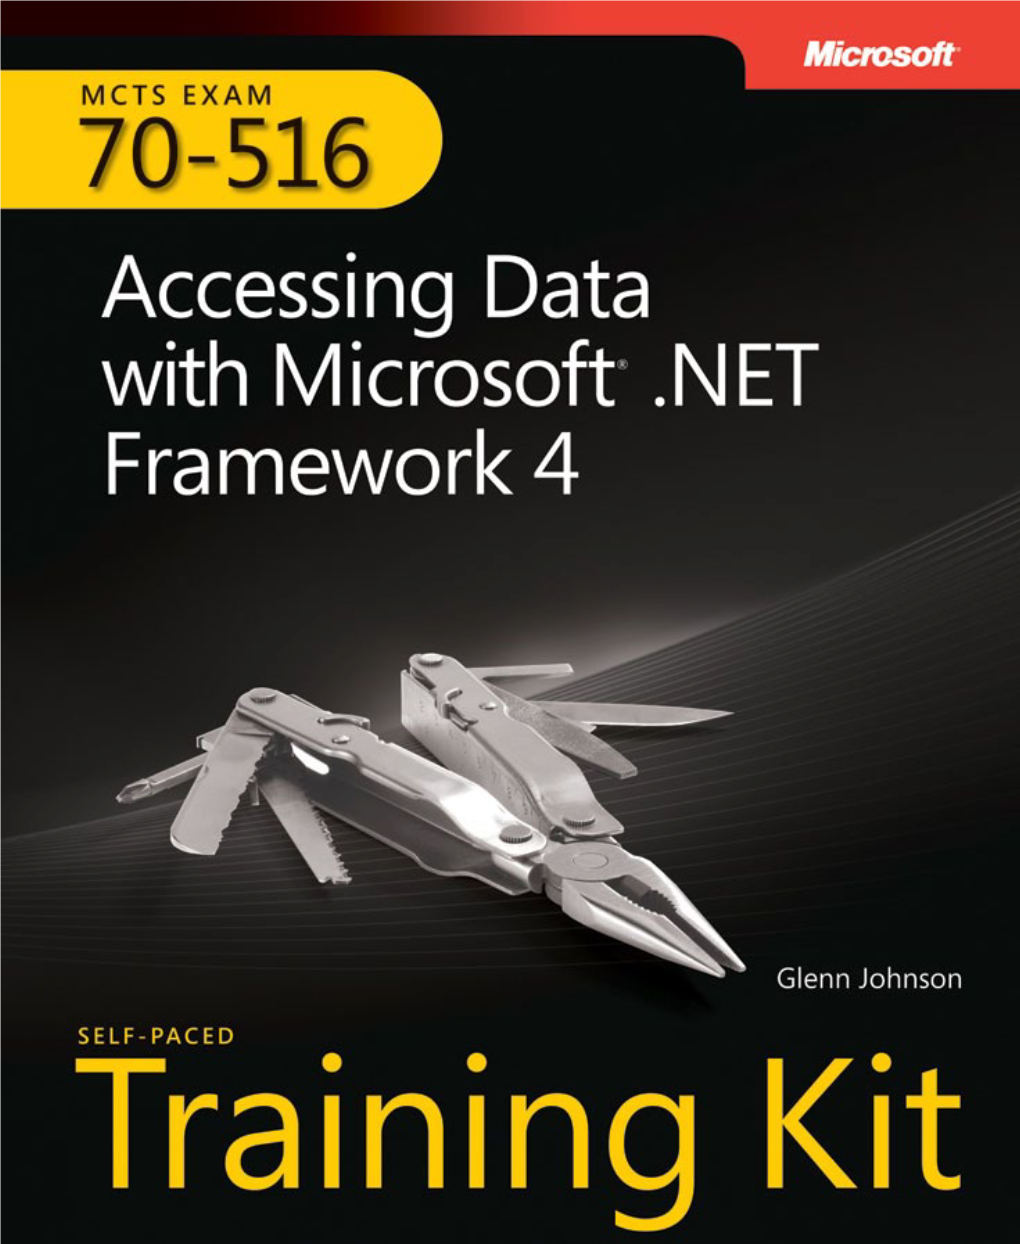 MCTS Exam 70-516: Accessing Data with Microsoft .NET Framework 4